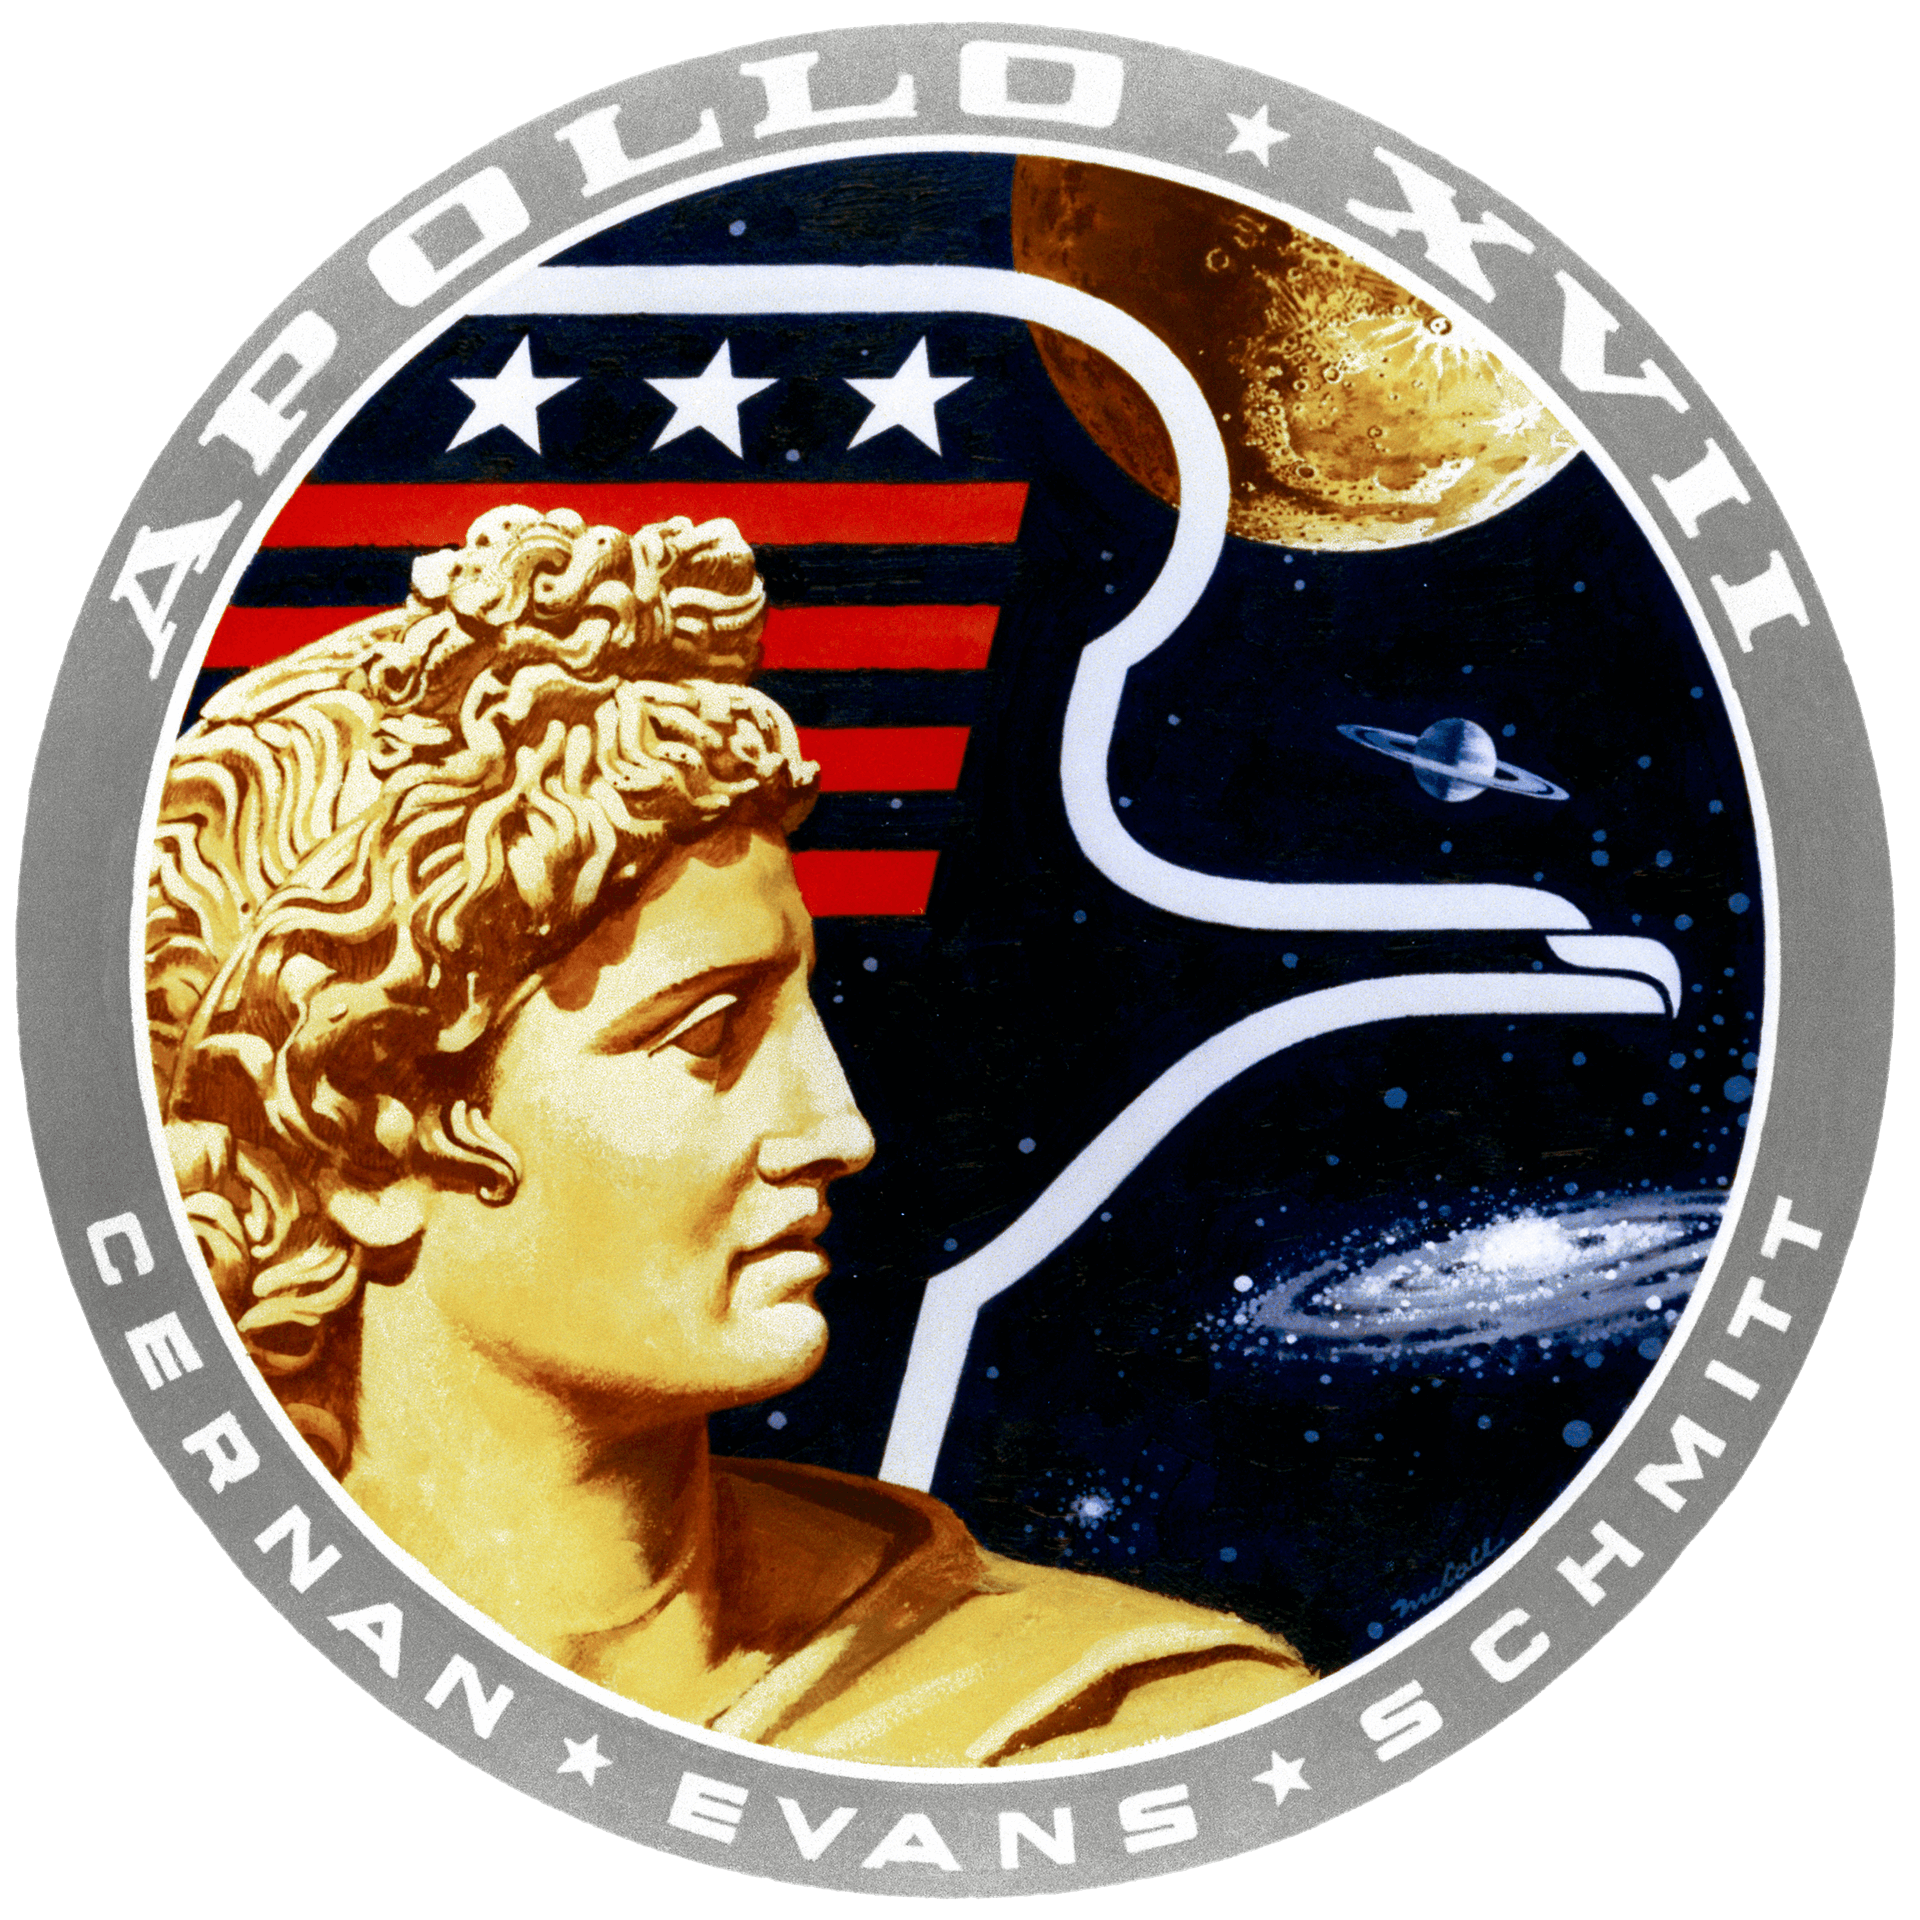 Mission patch for Apollo 17